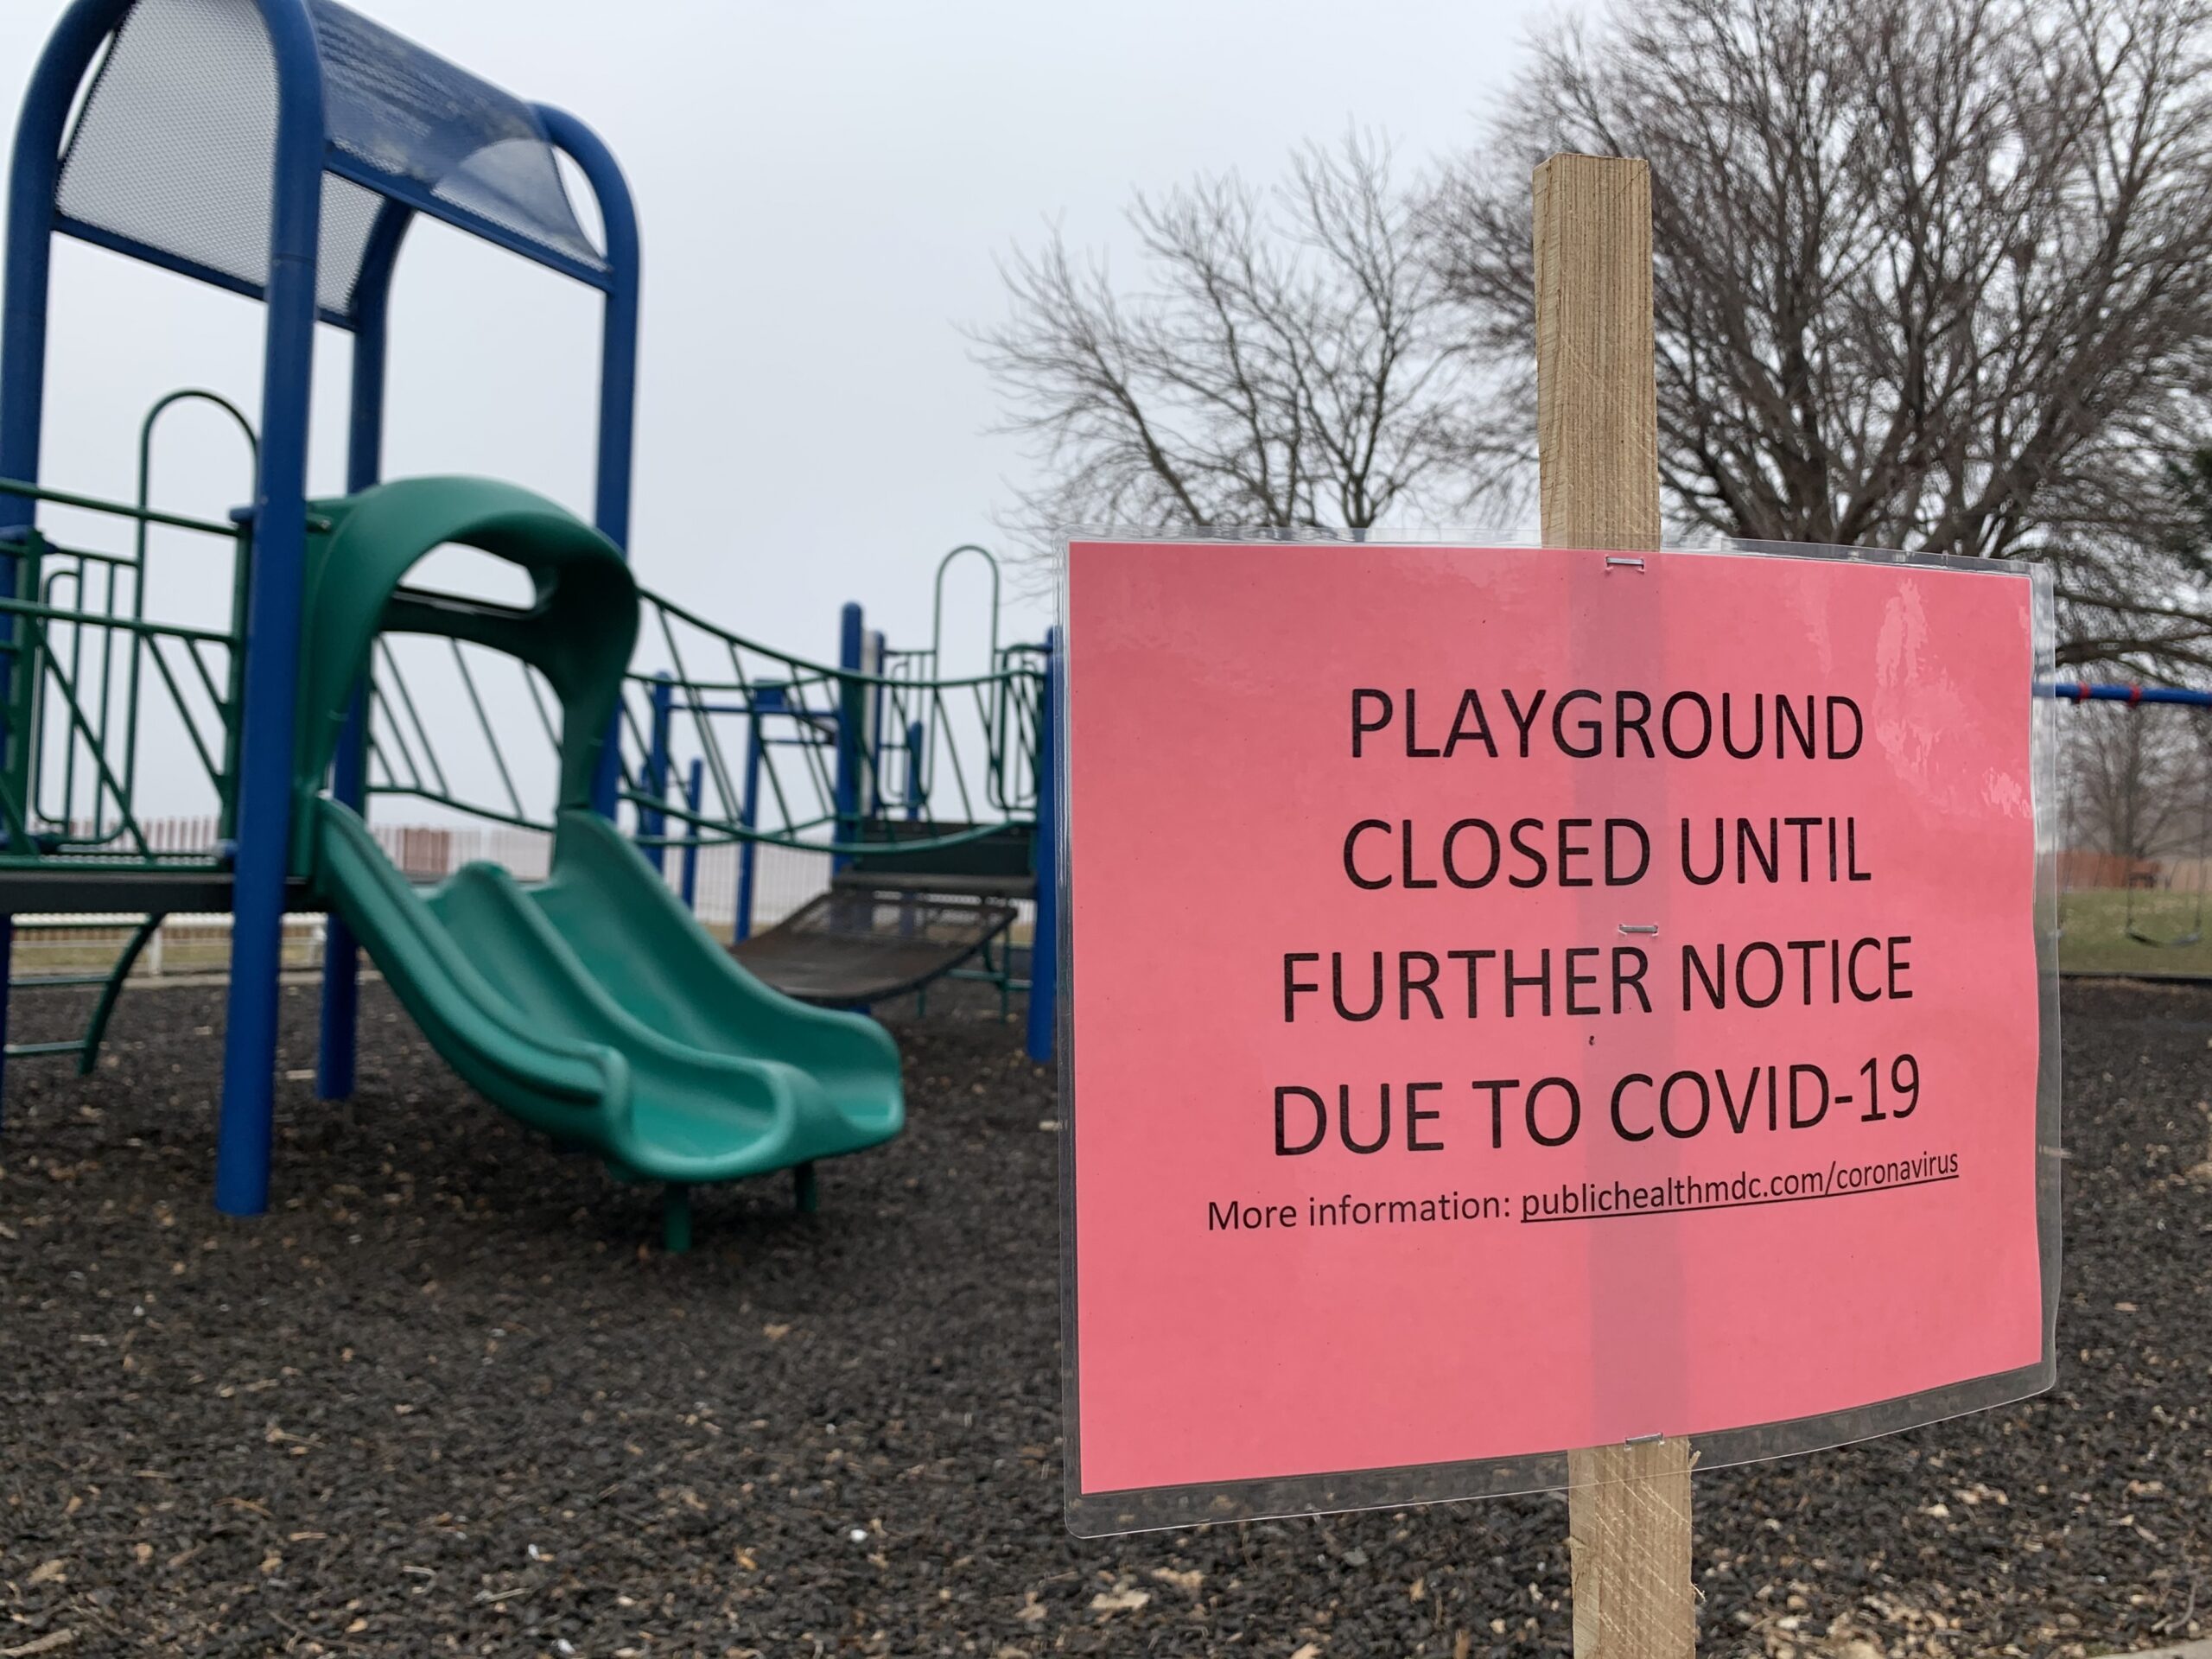 Playground at James Madison Park closed due to COVID-19